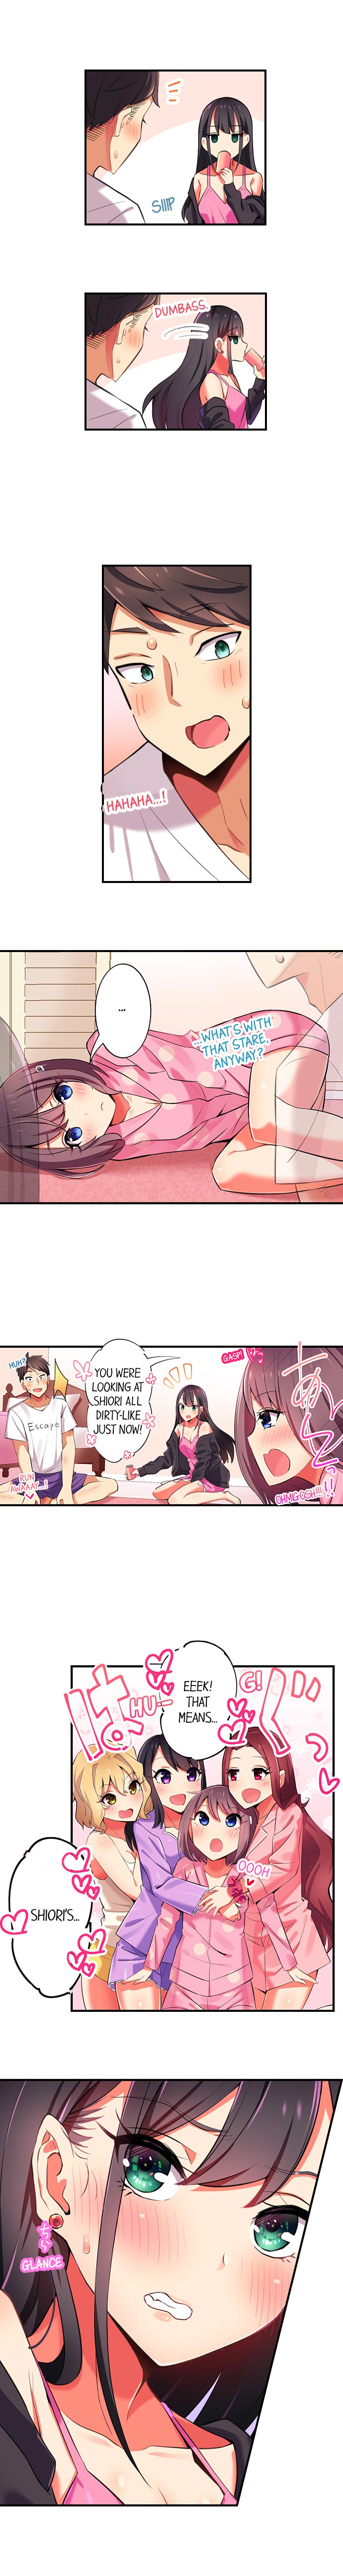 Fucking My Niece at the Girls' Pajama Party - Chapter 1 Page 6